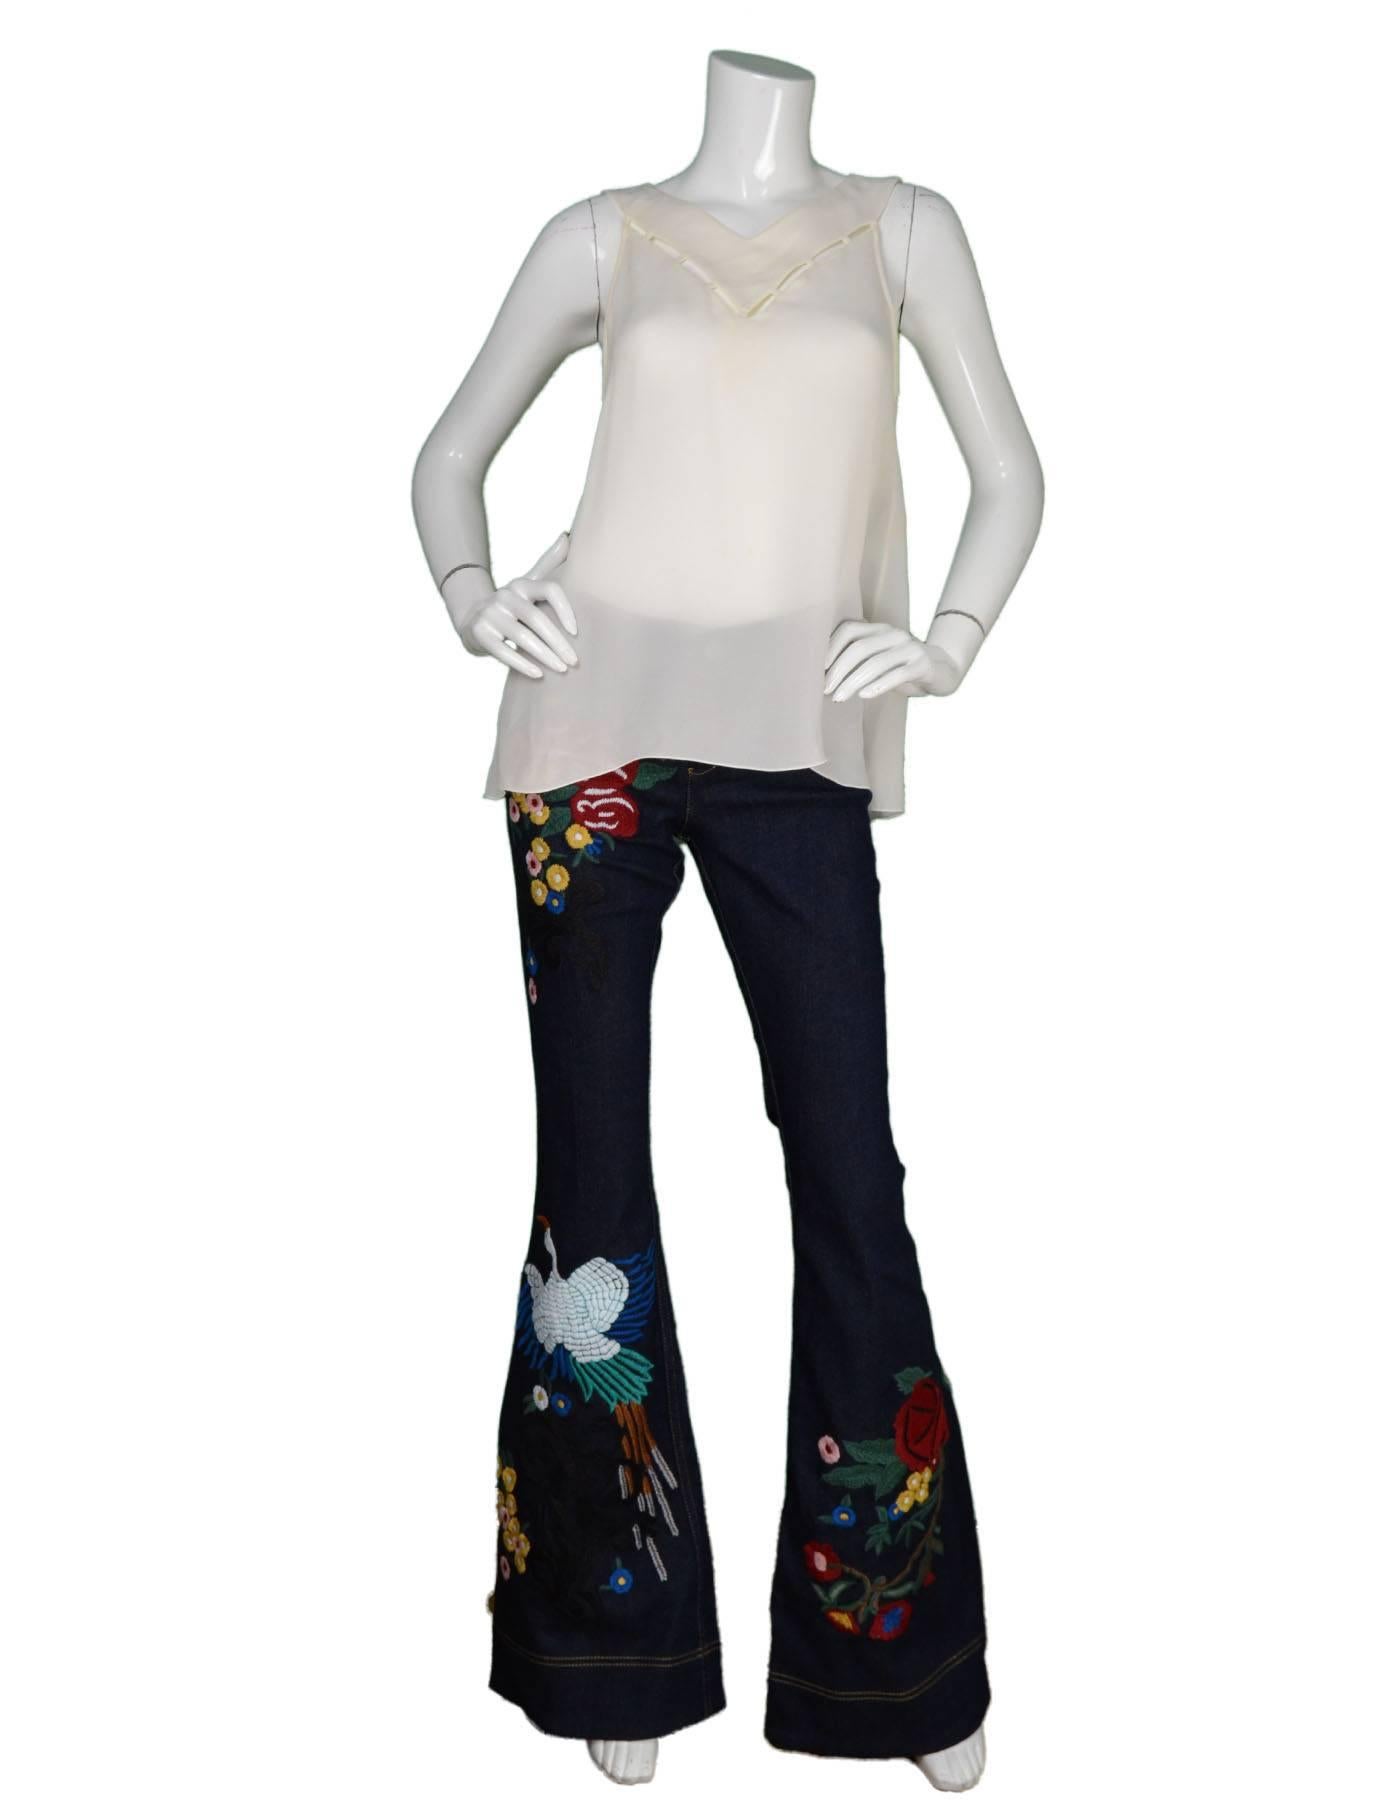 Alice & Olivia NEW Ltd ed. Denim Bell Bottoms
Features multi-colored embroidery throughout

Made In: India
Color: Blue and multi-colored
Composition: 62% cotton, 32% lyocell, 5% polyester, 1% elastane
Lining: None
Closure/Opening: Front